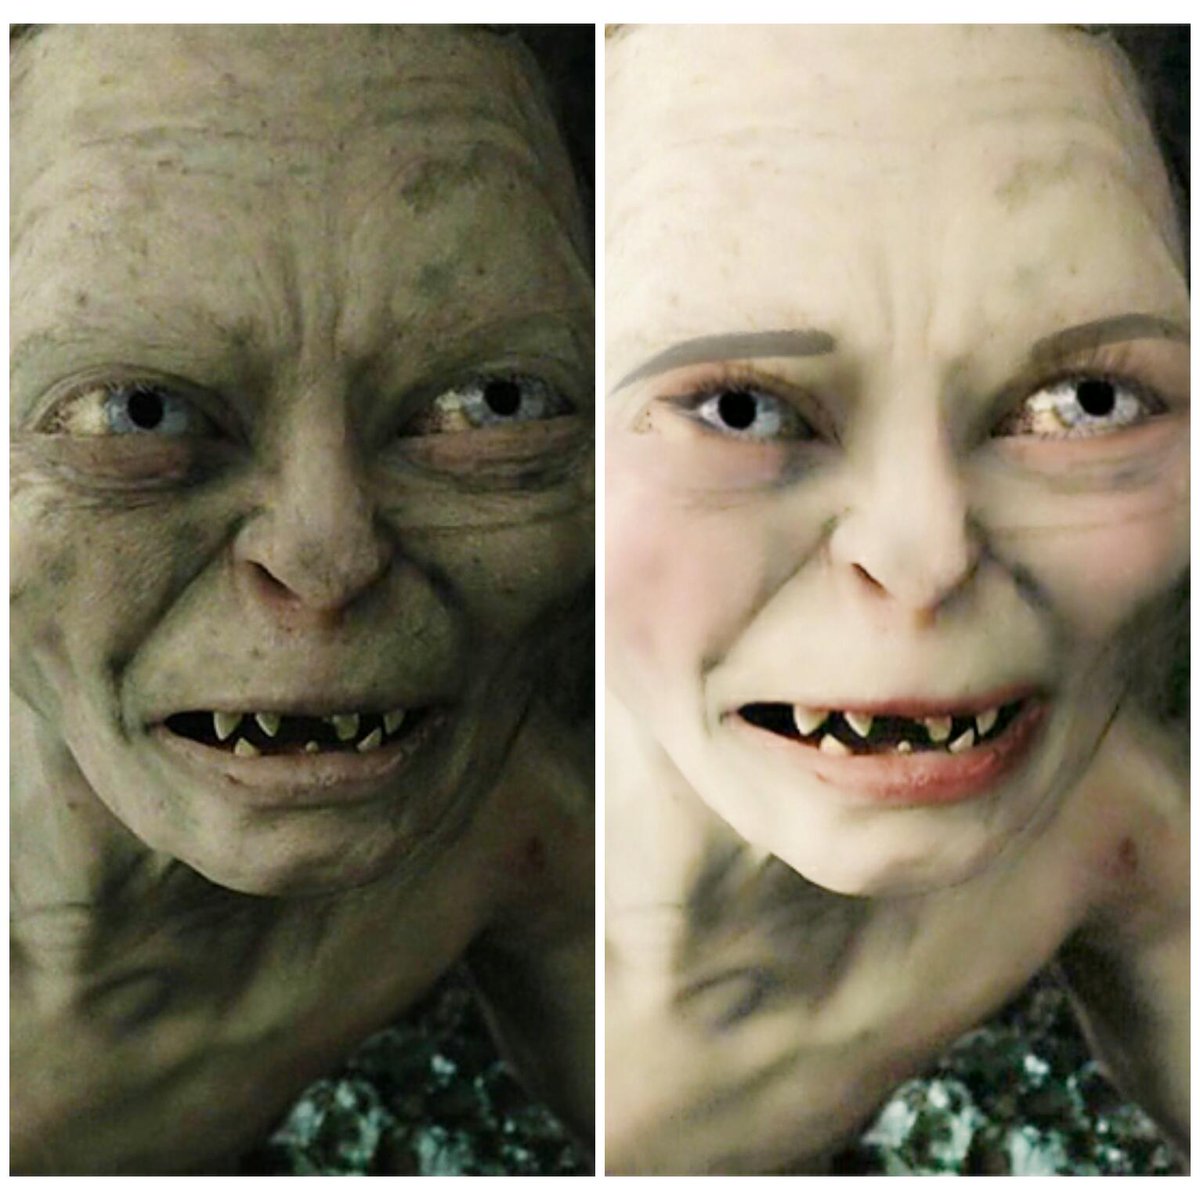 Jesse-Lee Lafferty on Twitter: "Just used a #Makeup app #Gollum When girls you don't #MakeupMonday #lordoftherings #funny https://t.co/ztYWLT7DQg" Twitter